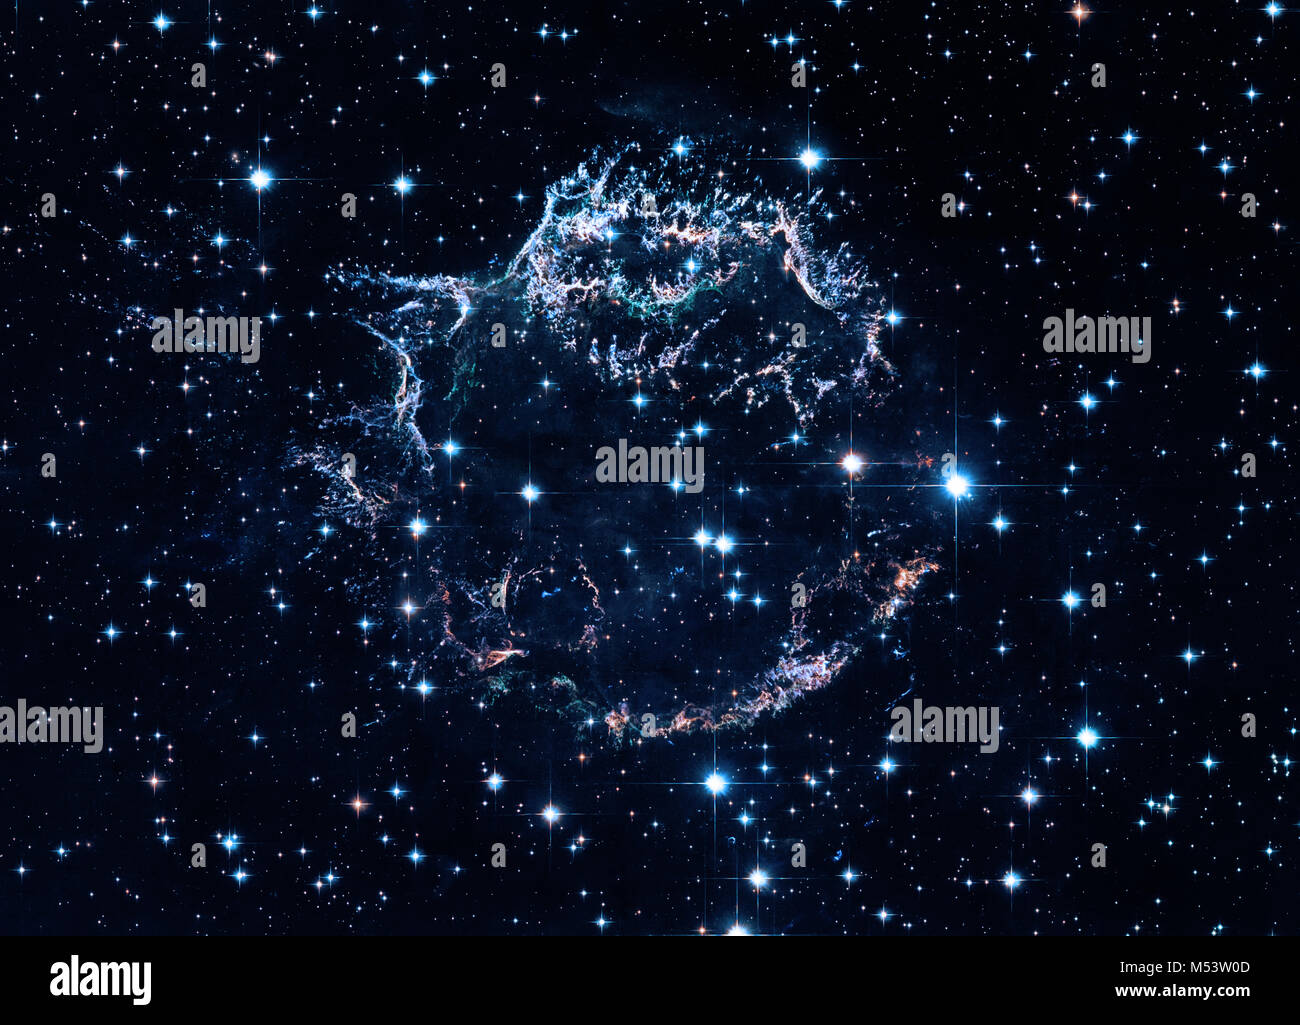 Remains of a supernova explosion. Cassiopeia A. Elements of this image furnished by NASA. Retouched image. Stock Photo